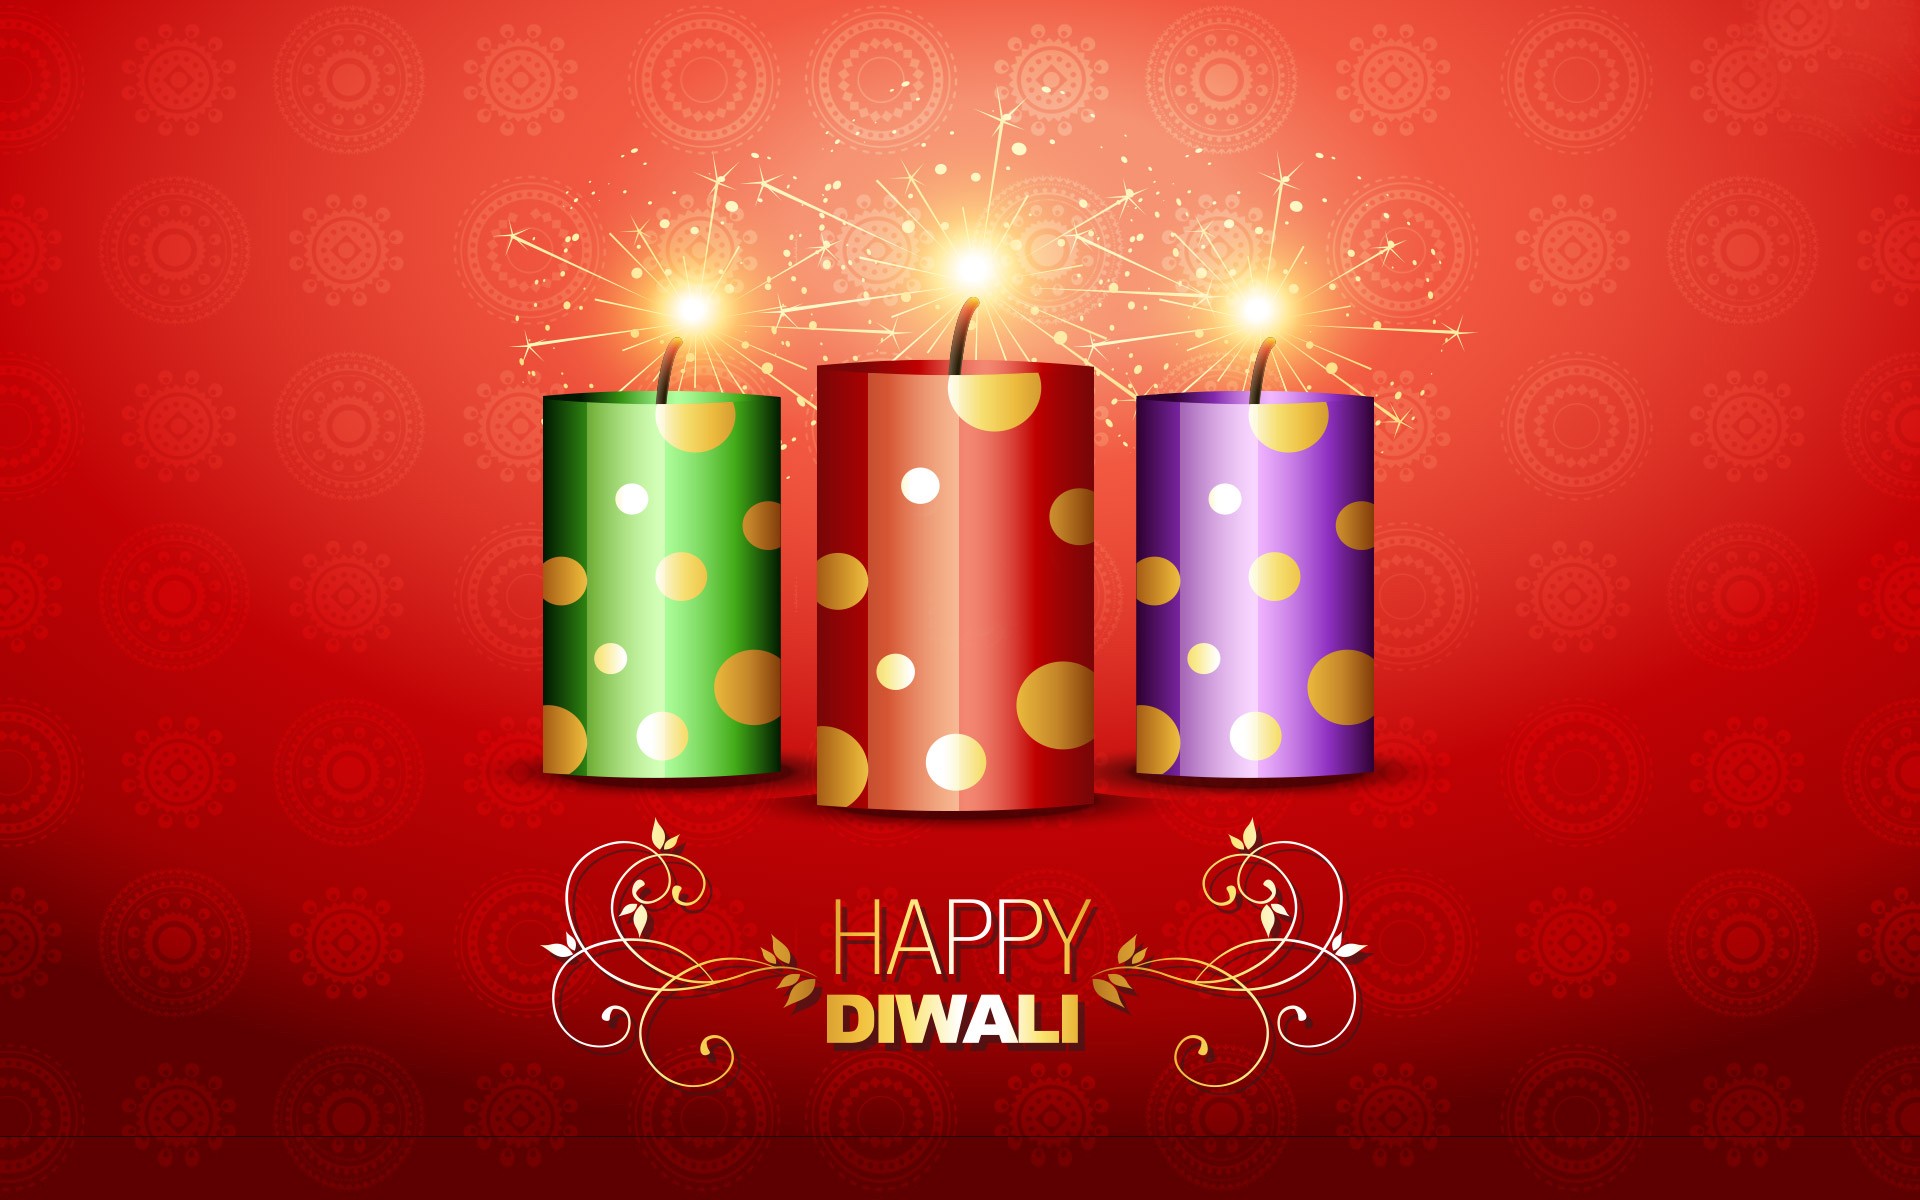 Happy Diwali Hd Images, Wallpapers, Picture & Photos - Download